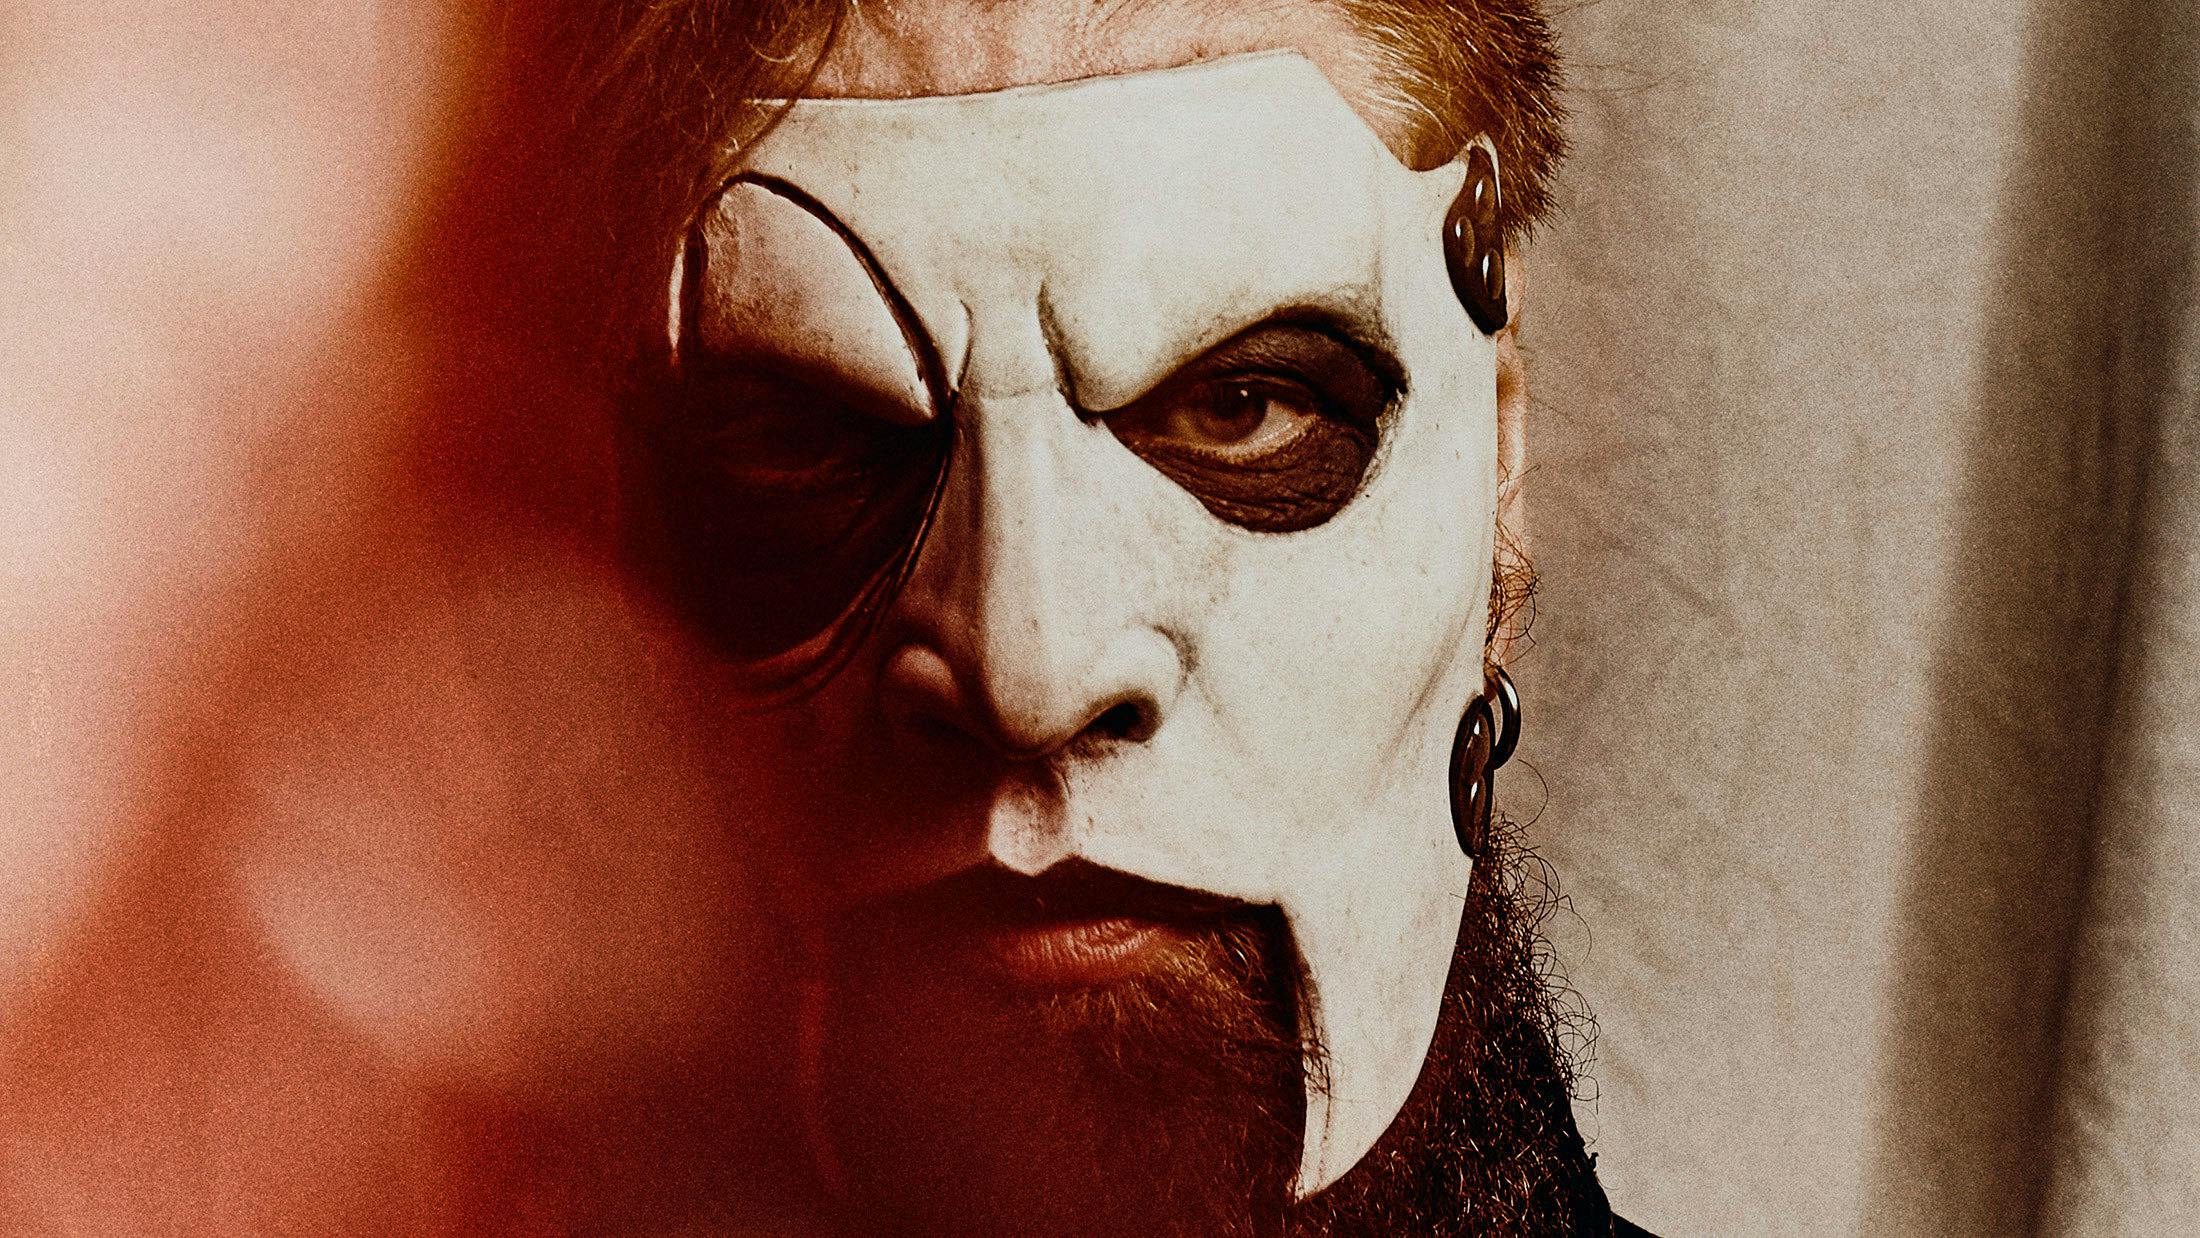 Slipknot: Jim Root’s track-by-track guide to We Are Not Your Kind